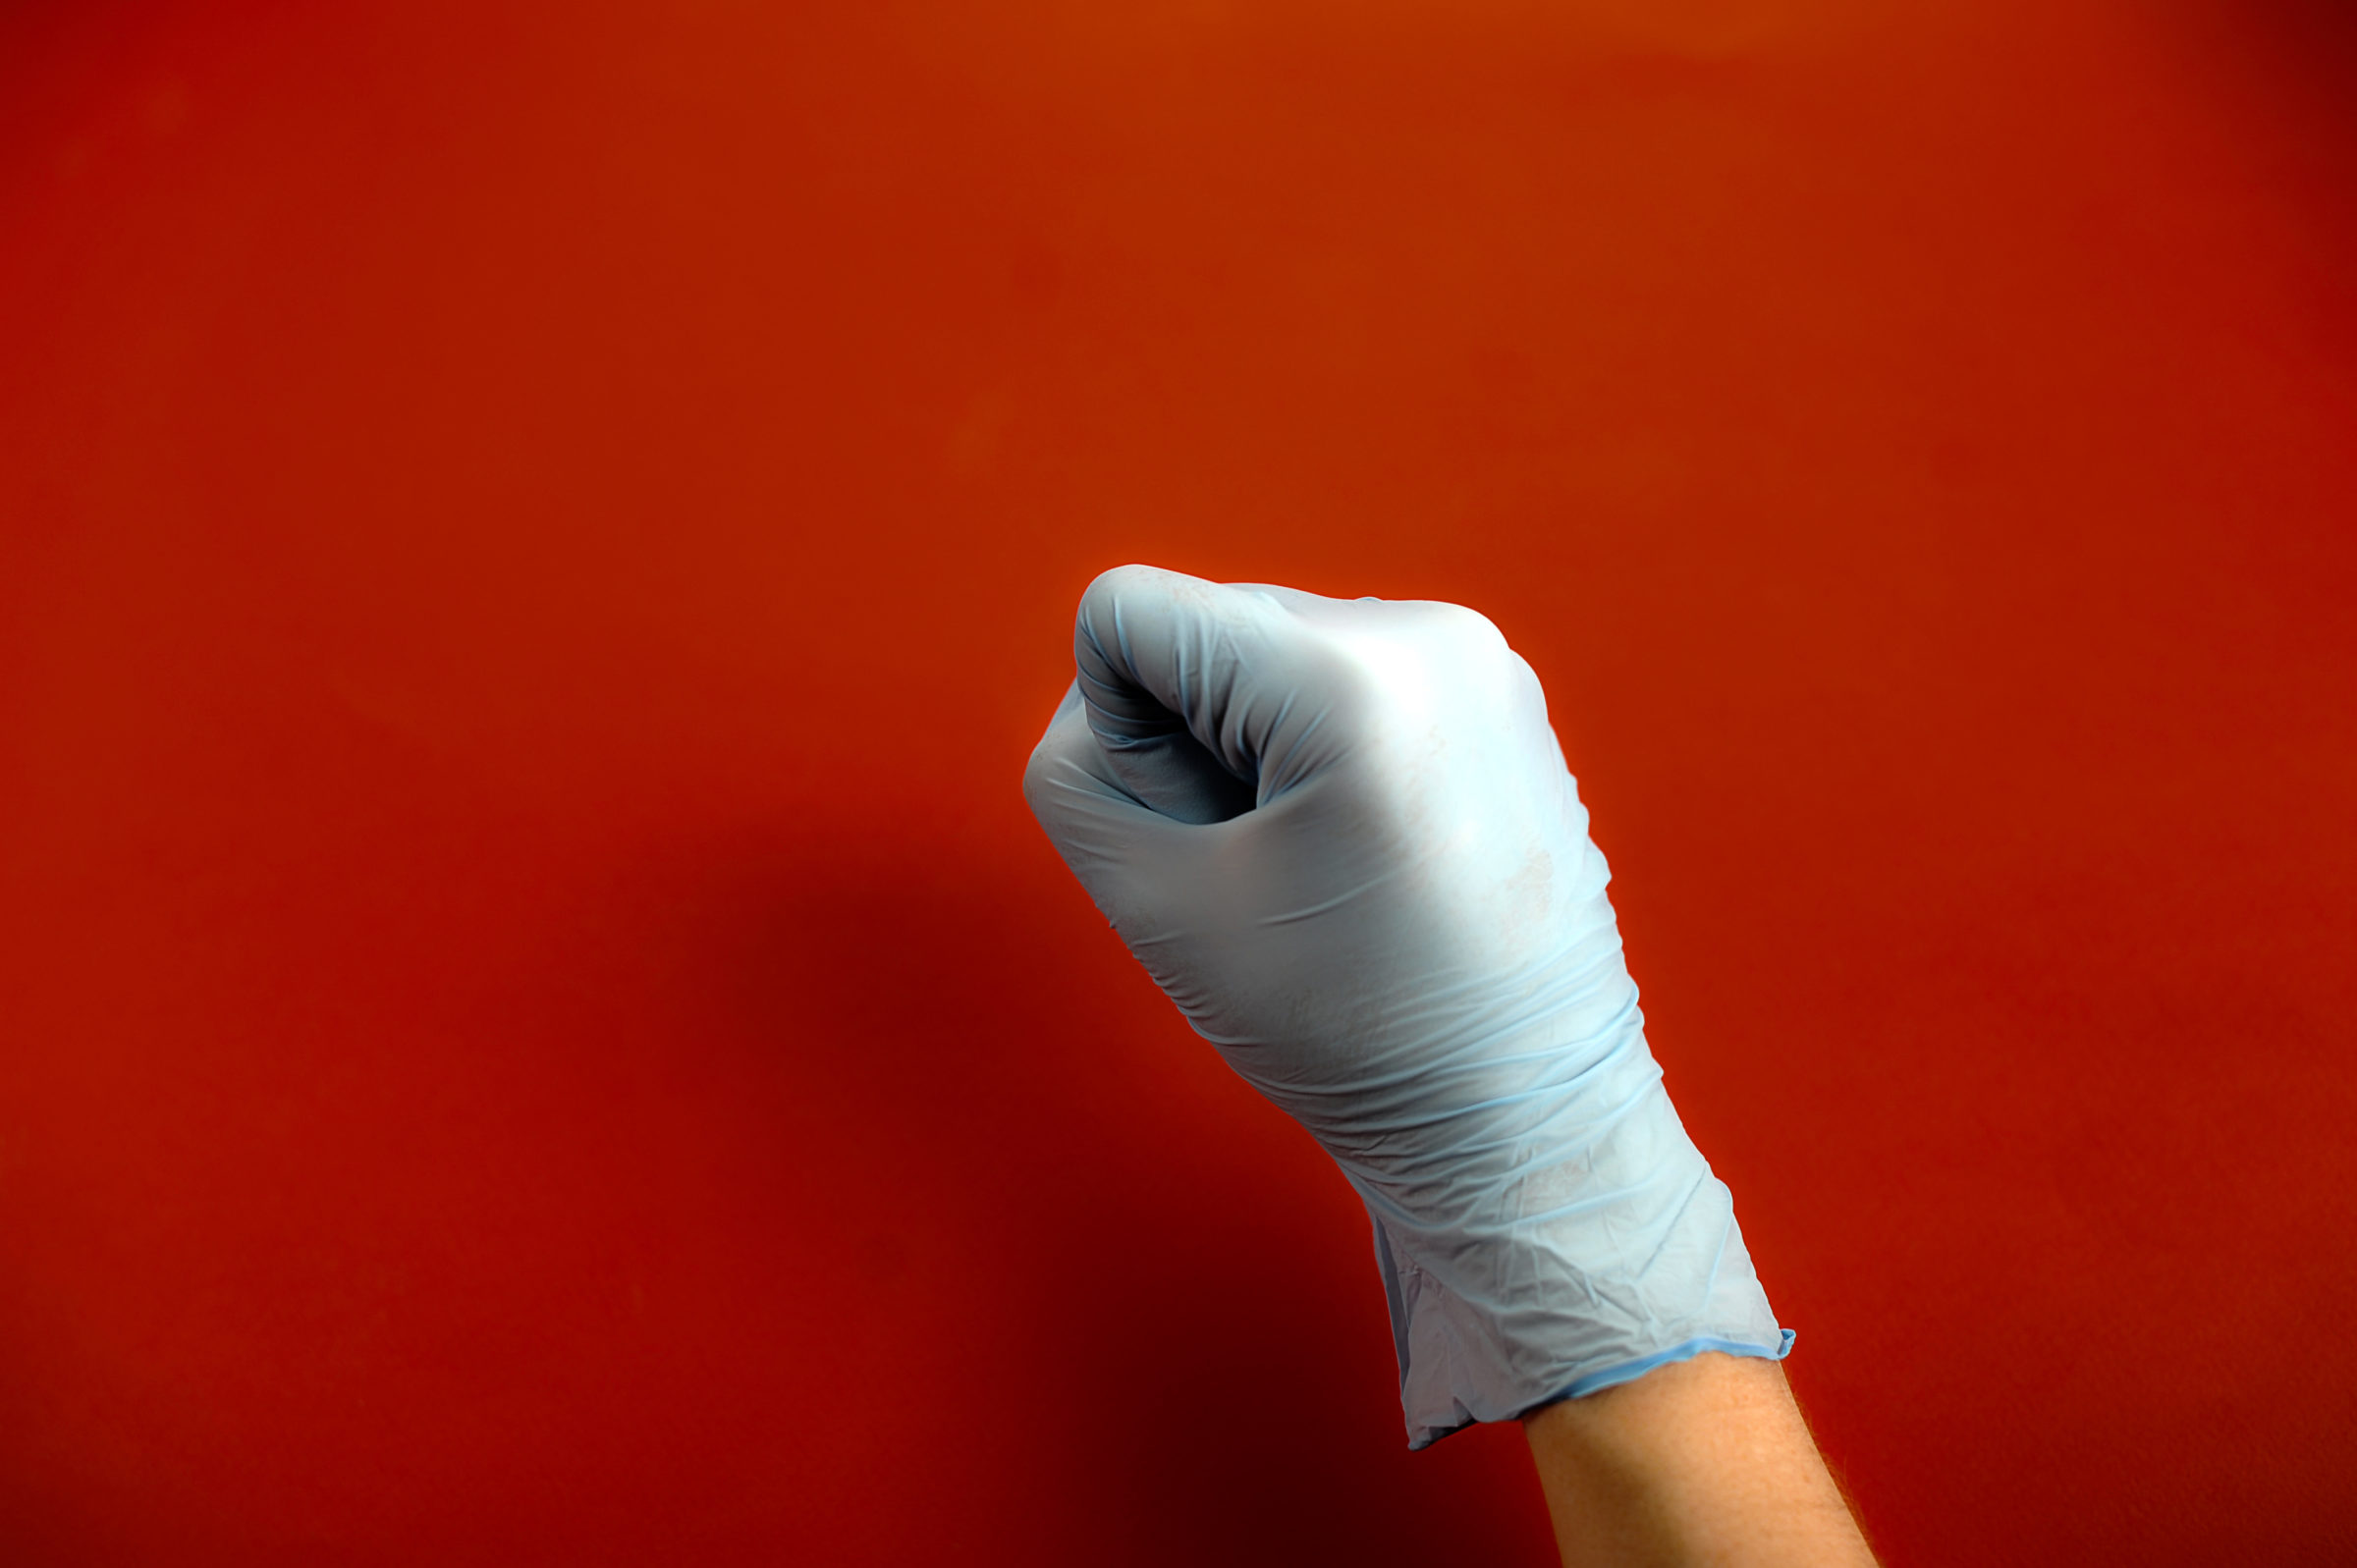 Hand in medical latex glove. Hand clenched into a fist. Red background. Close-up. Concept: Hand gestures for expressing emotions.